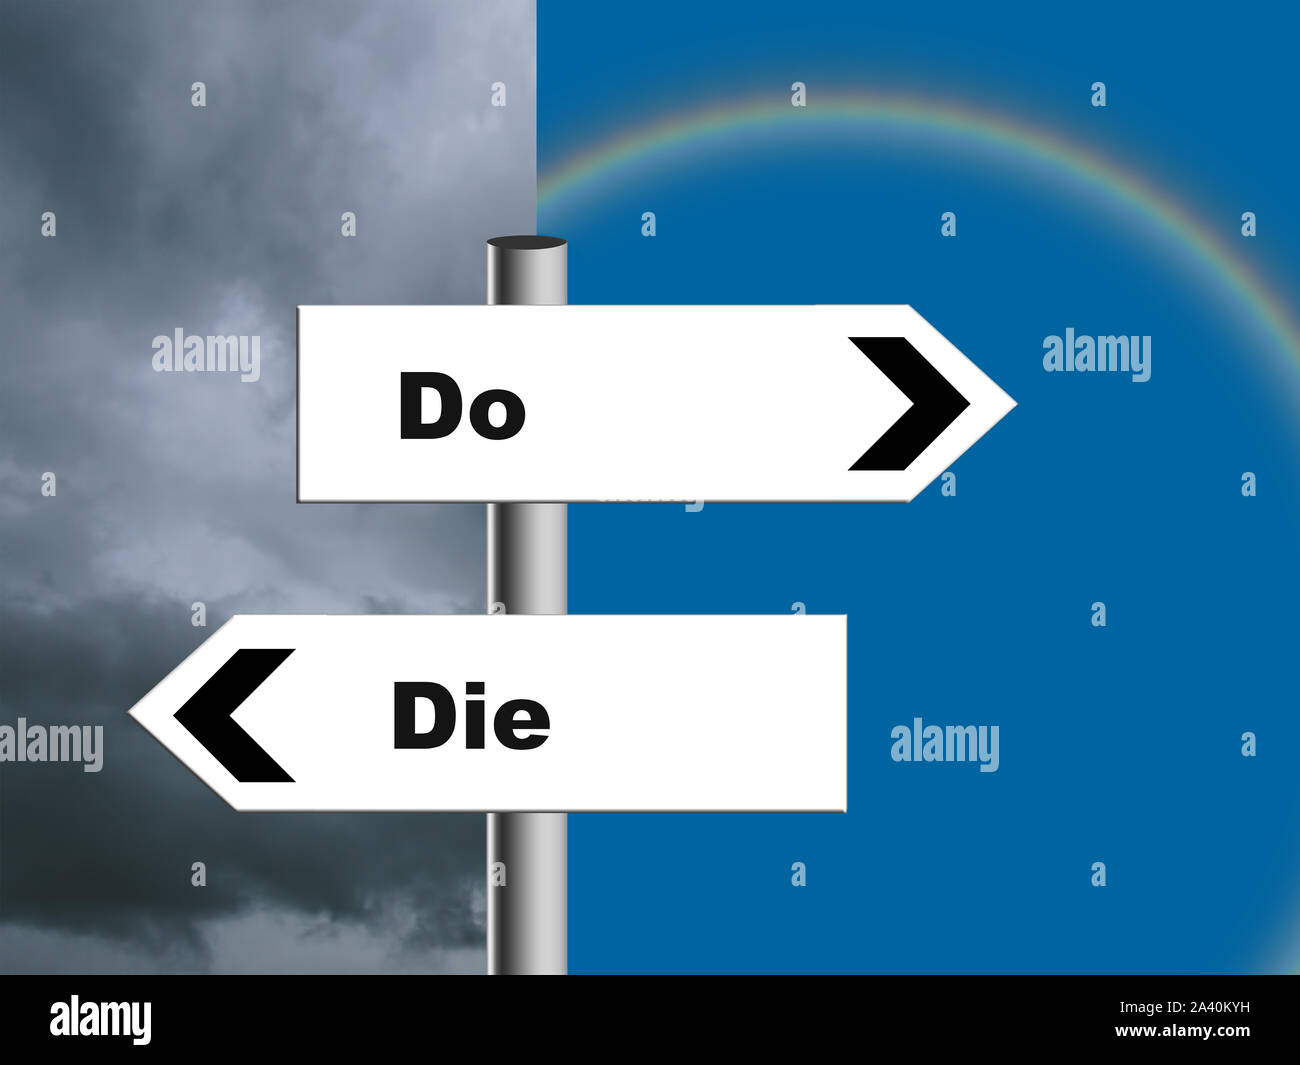 Do or Die signpost. Tory, Conservative party policy EU and UK Brexit negotiations. Storm or rainblow, blue sky. Concept. Stock Photo